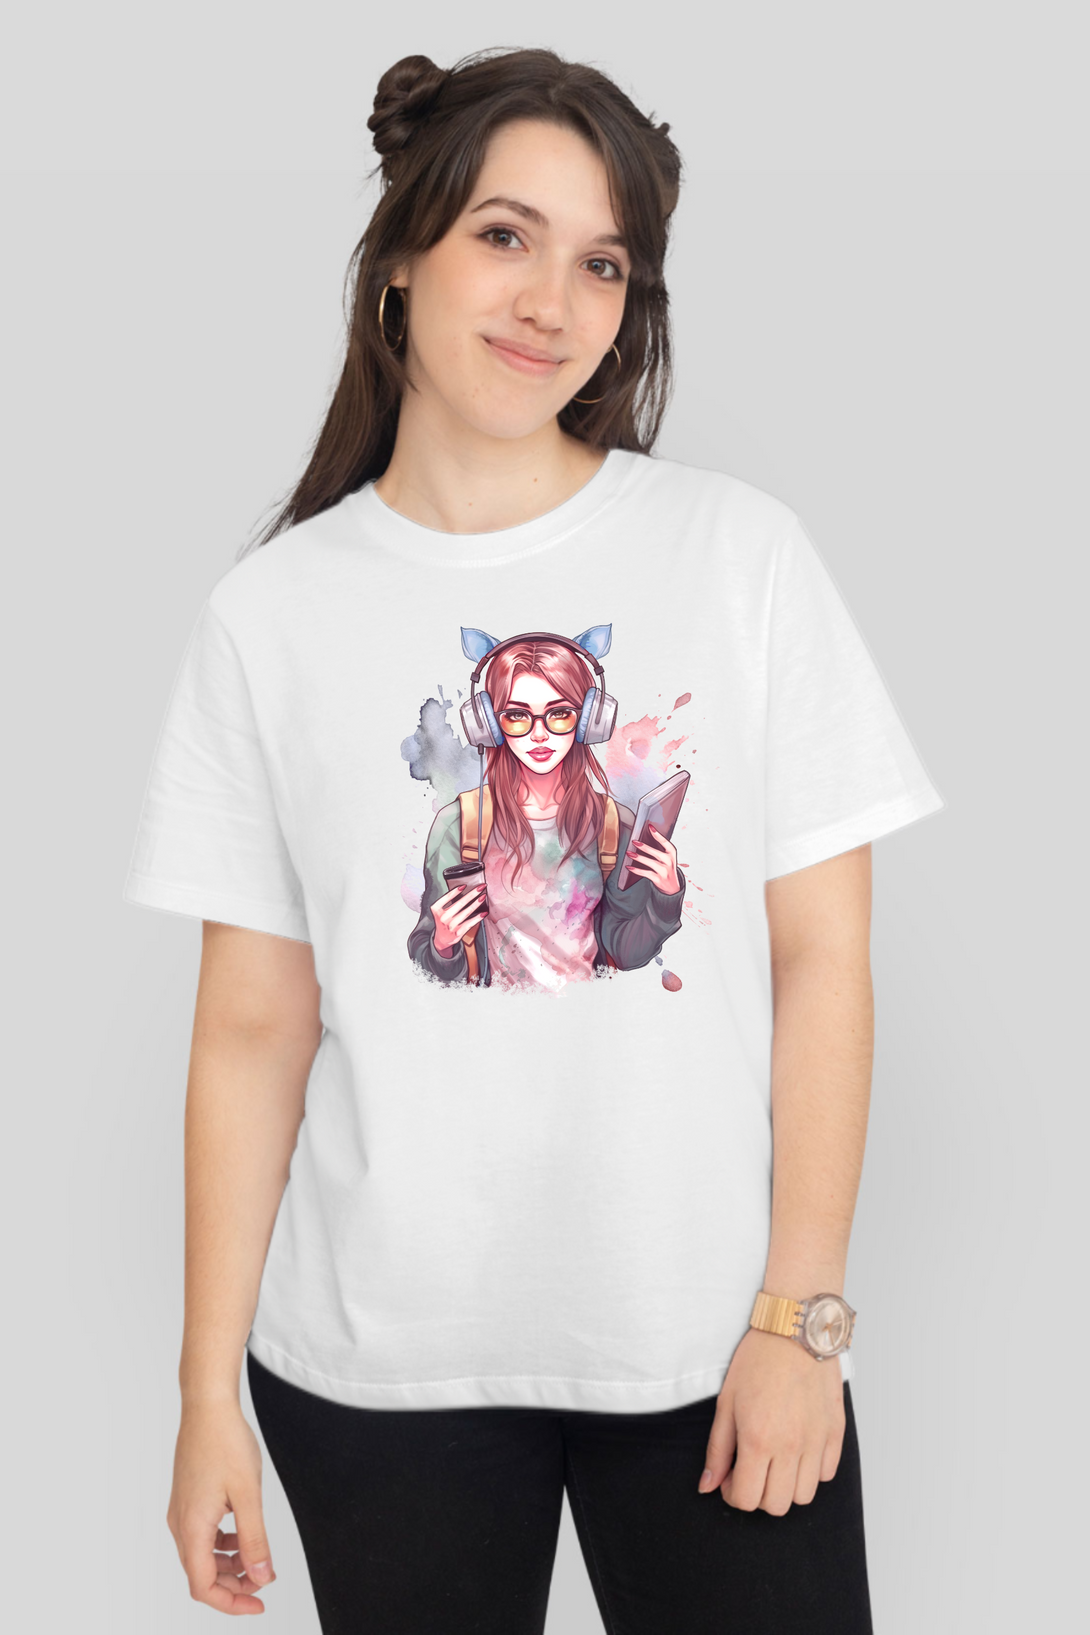 Artistic Student Printed T-Shirt For Women - WowWaves - 7